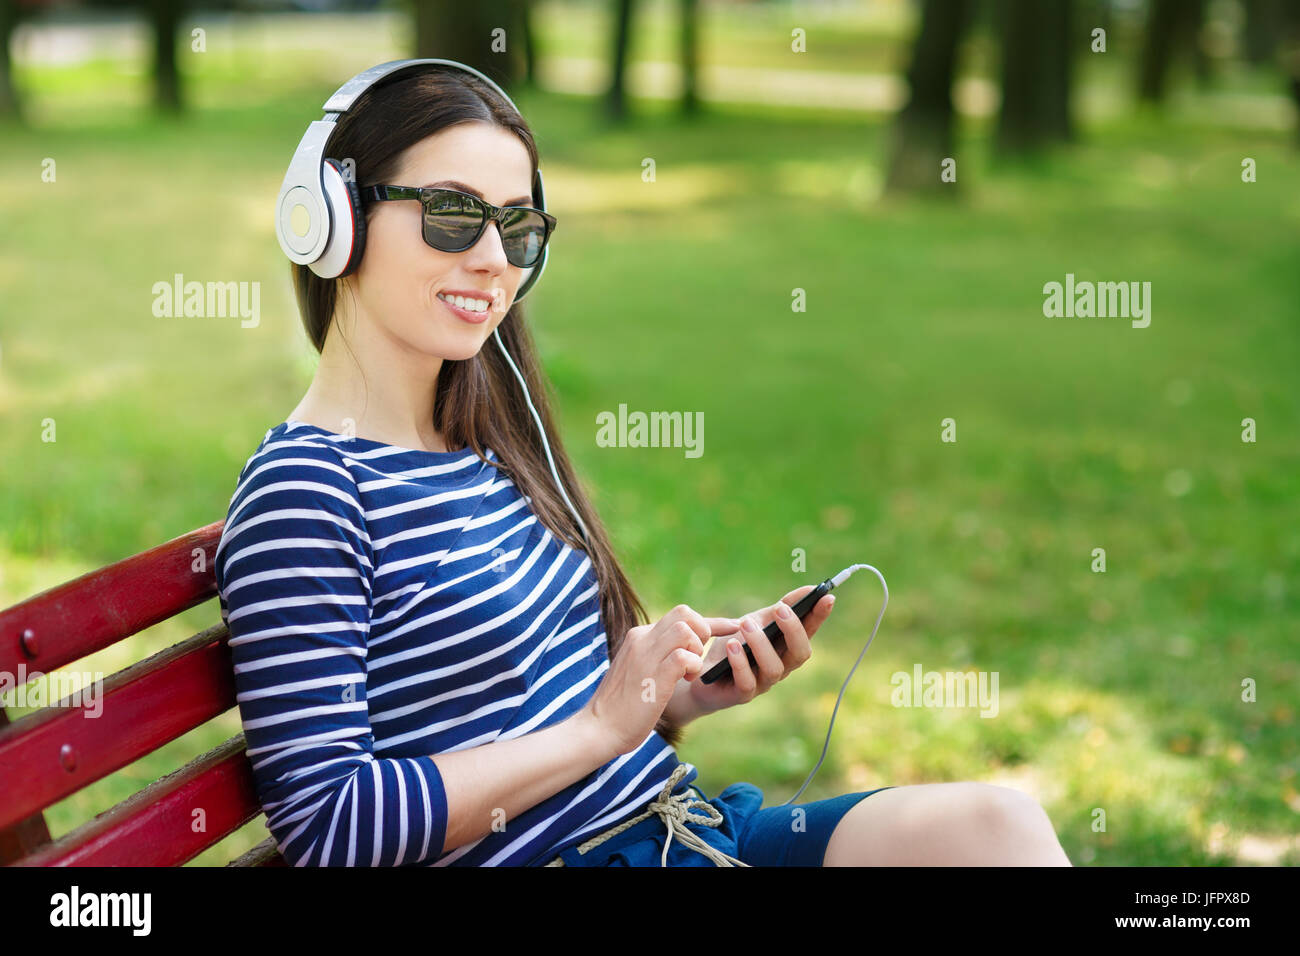 Young happy smiling brunette woman with headphones outdoors on summer day. Girl listening music in headphones in park Stock Photo